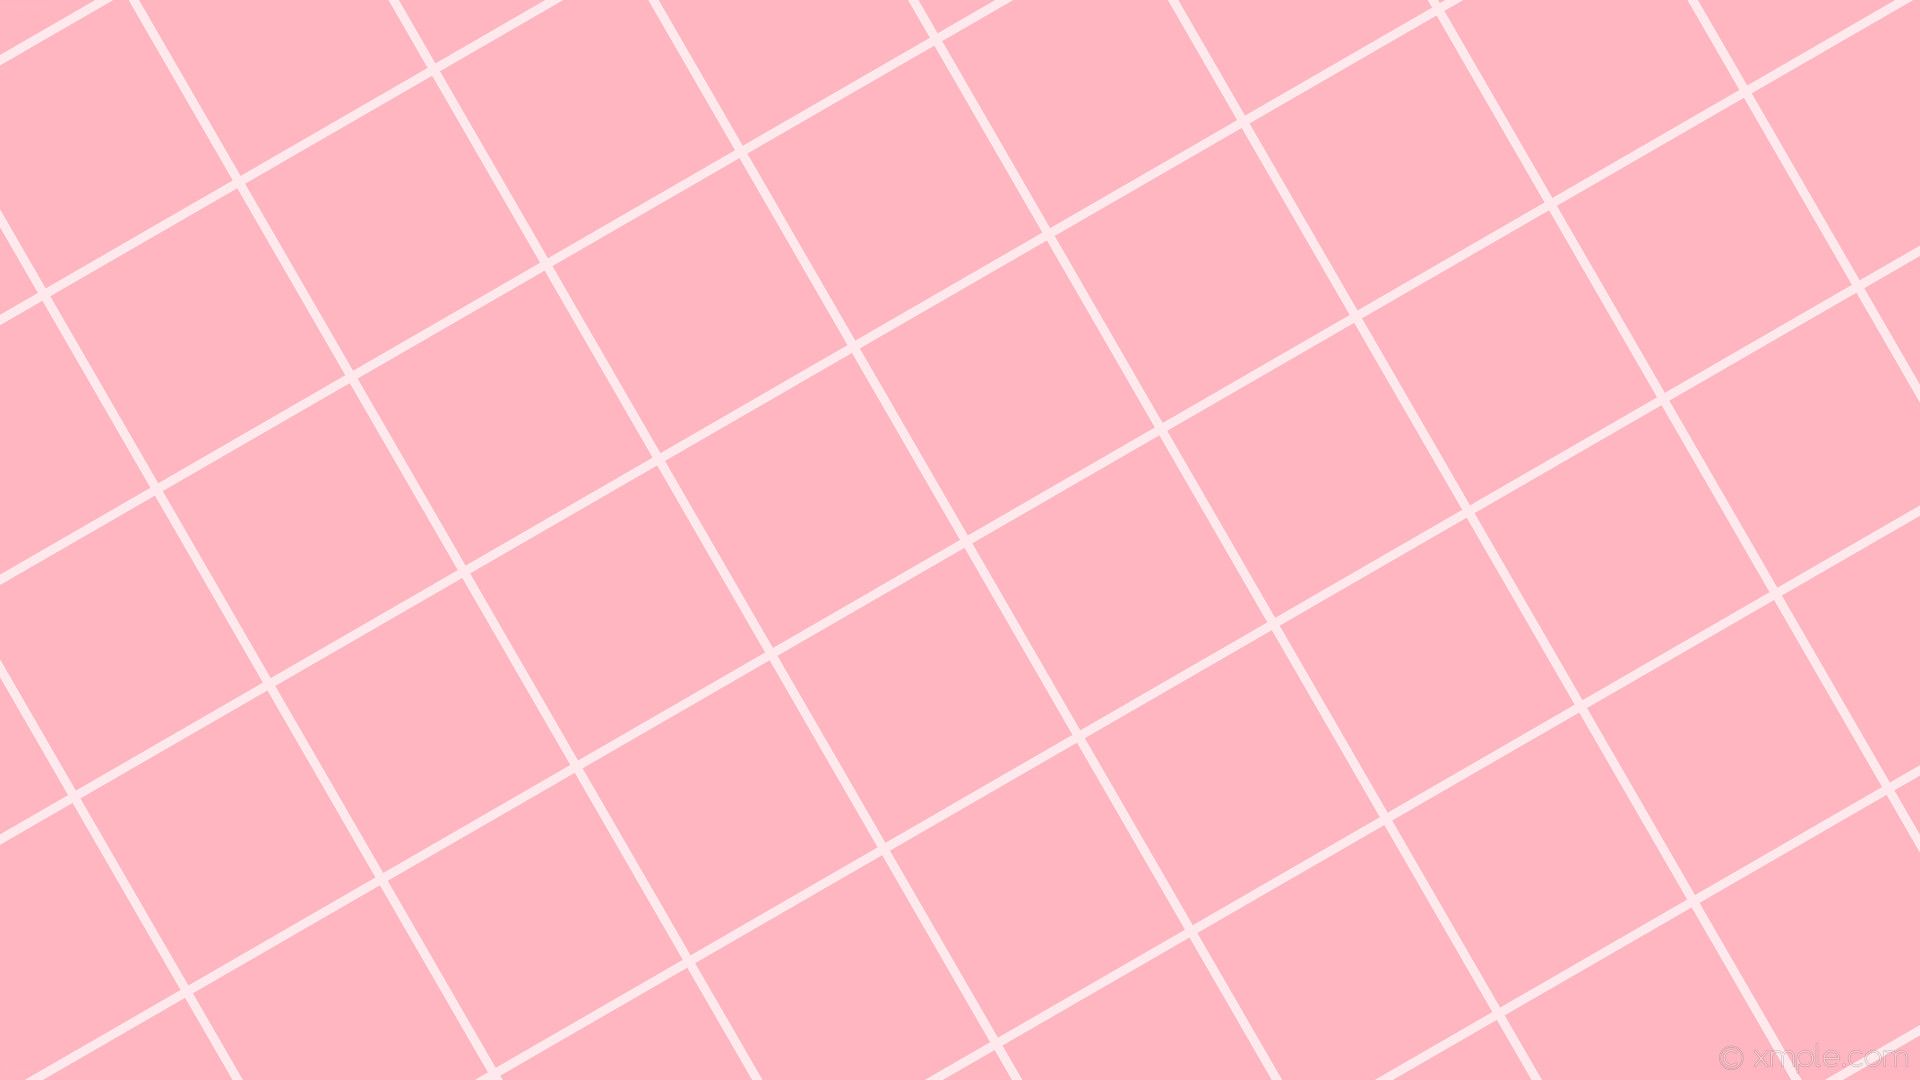 Aesthetic Pink And White Grid Wallpaper